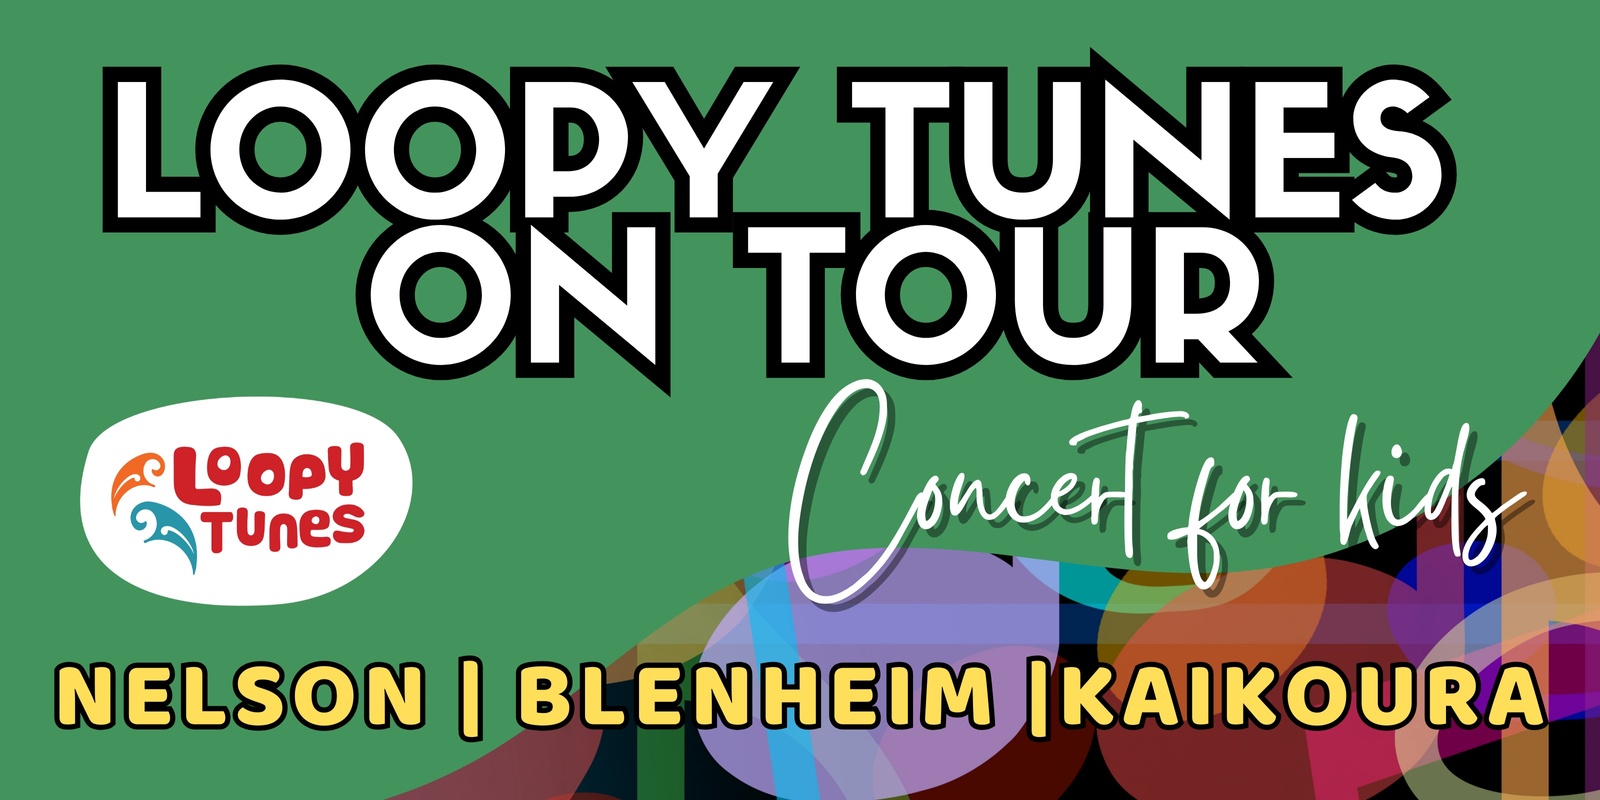 Banner image for Loopy Tunes on Tour - Concert for Kids! [Kaikōura]